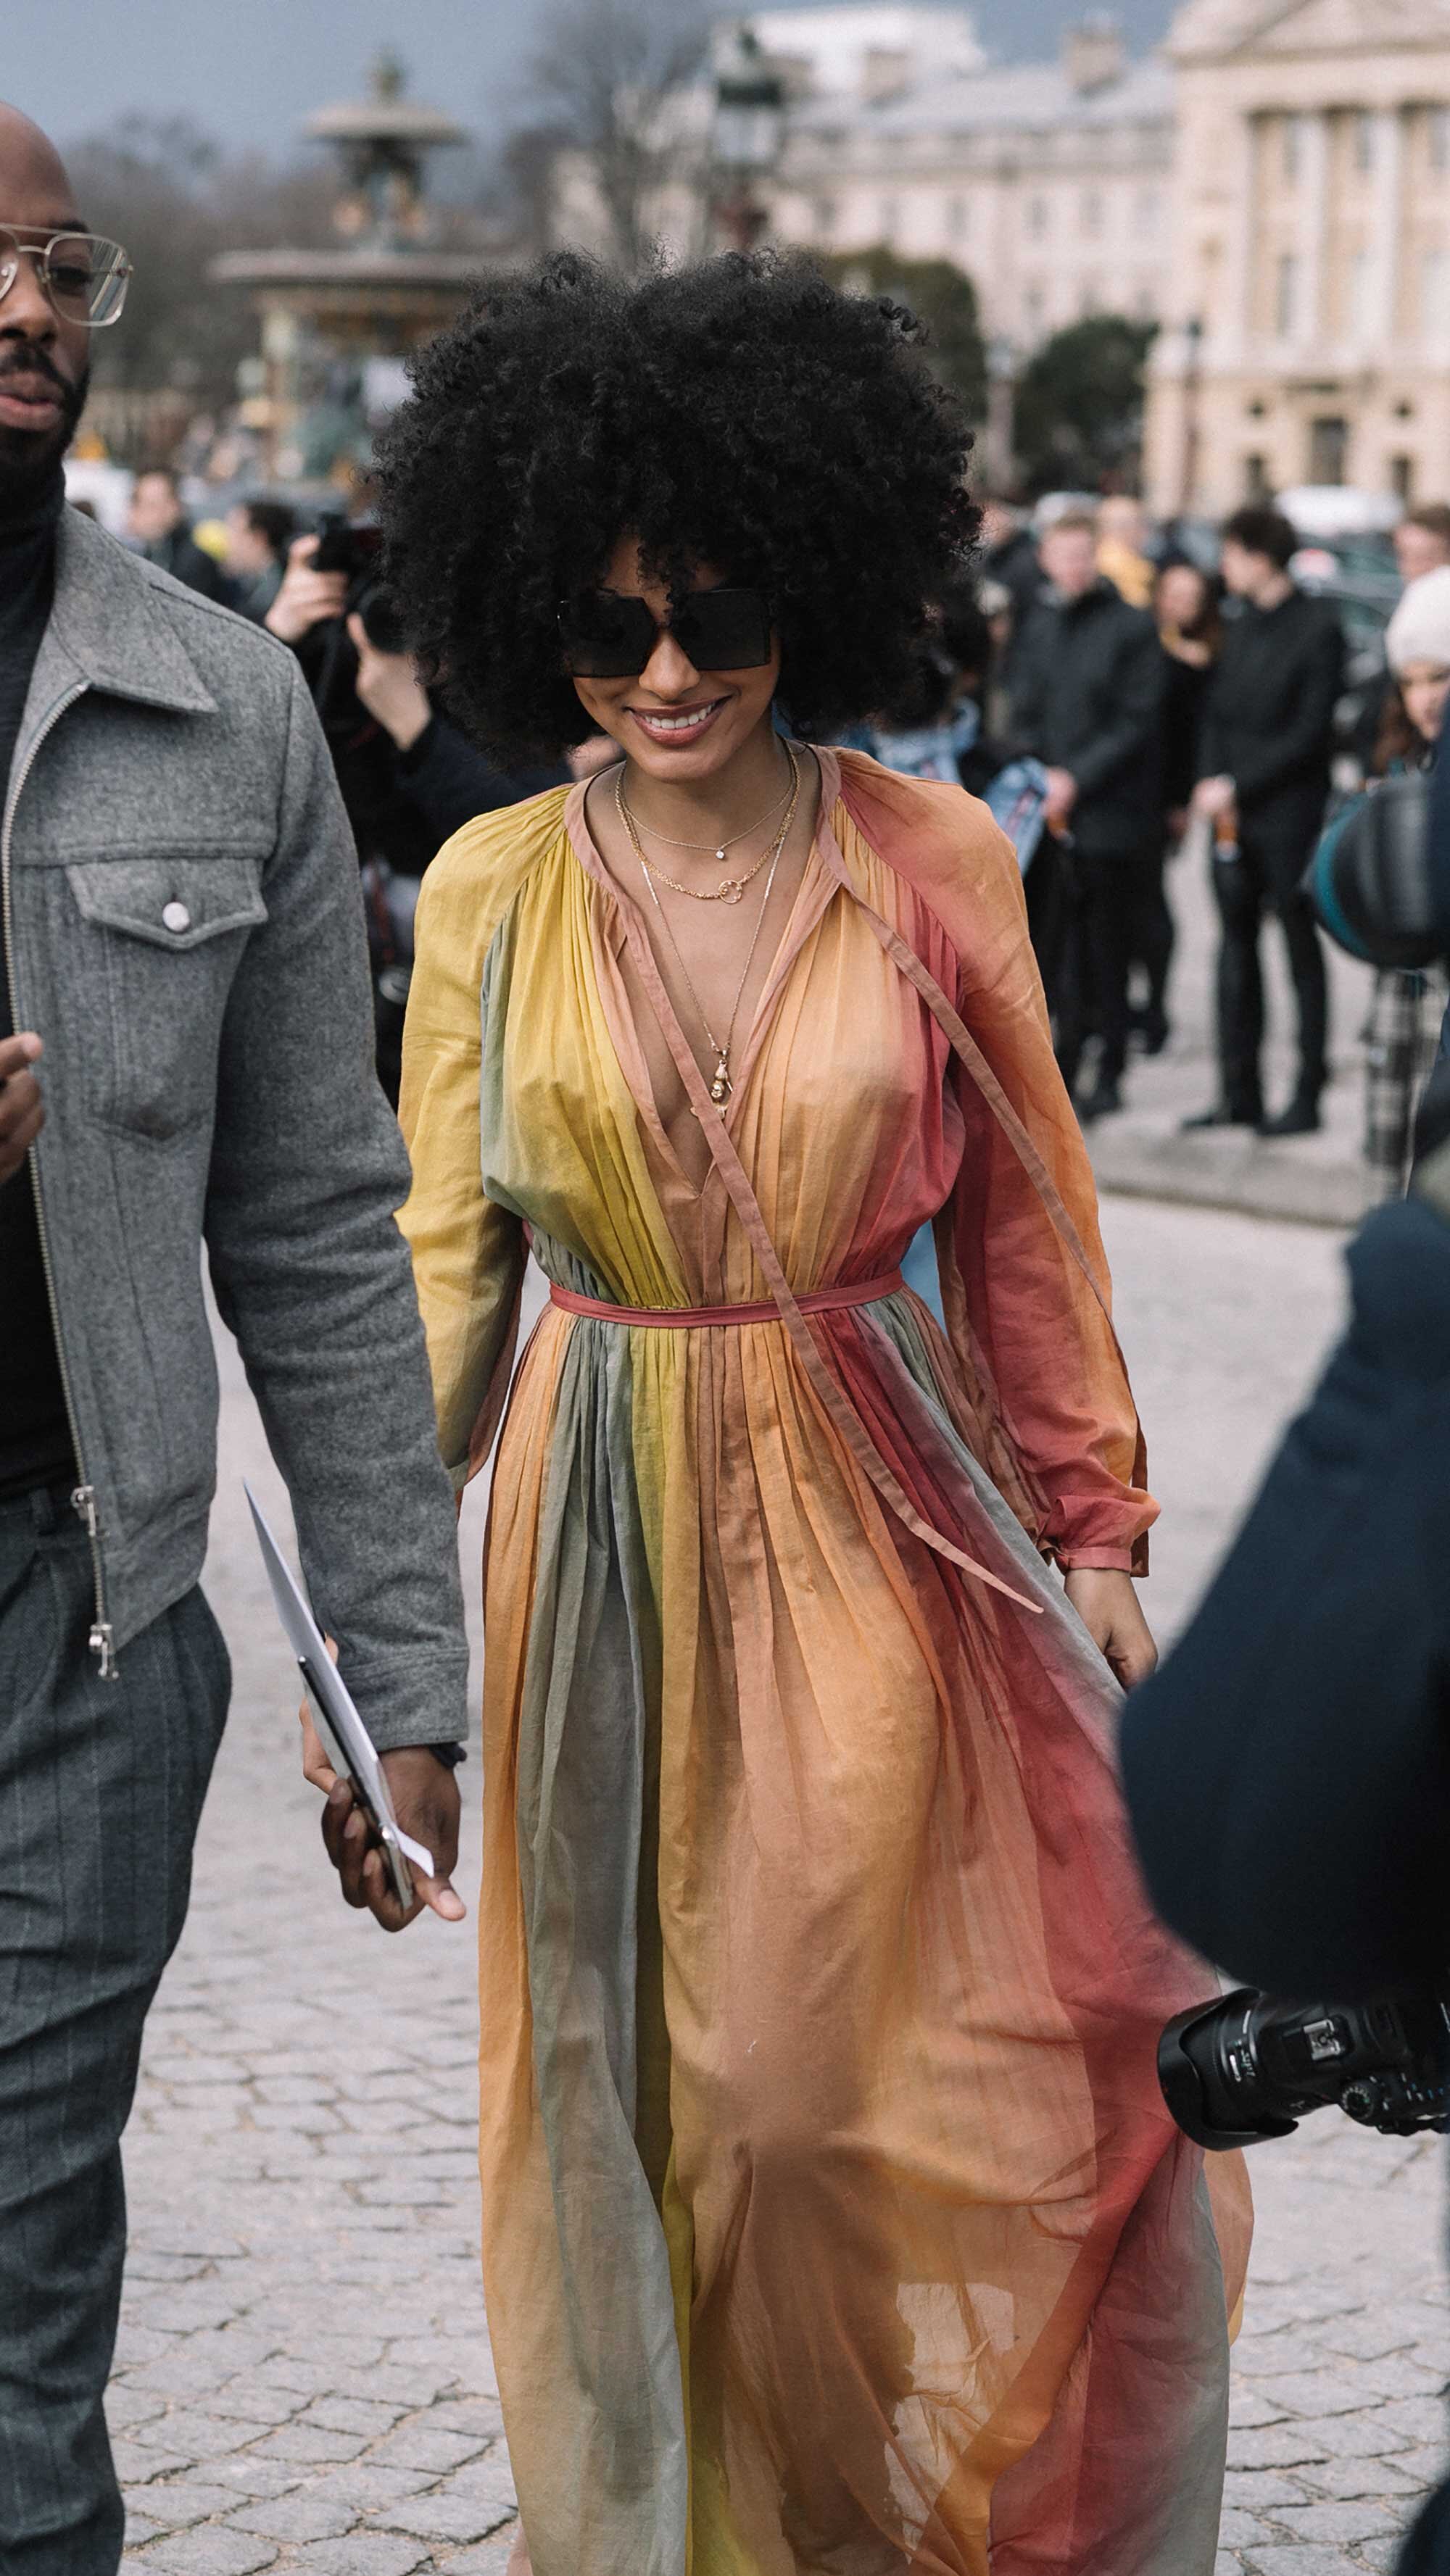 Best outfits Dior Show during Paris Fashion Week Street Style Day One -1.jpg